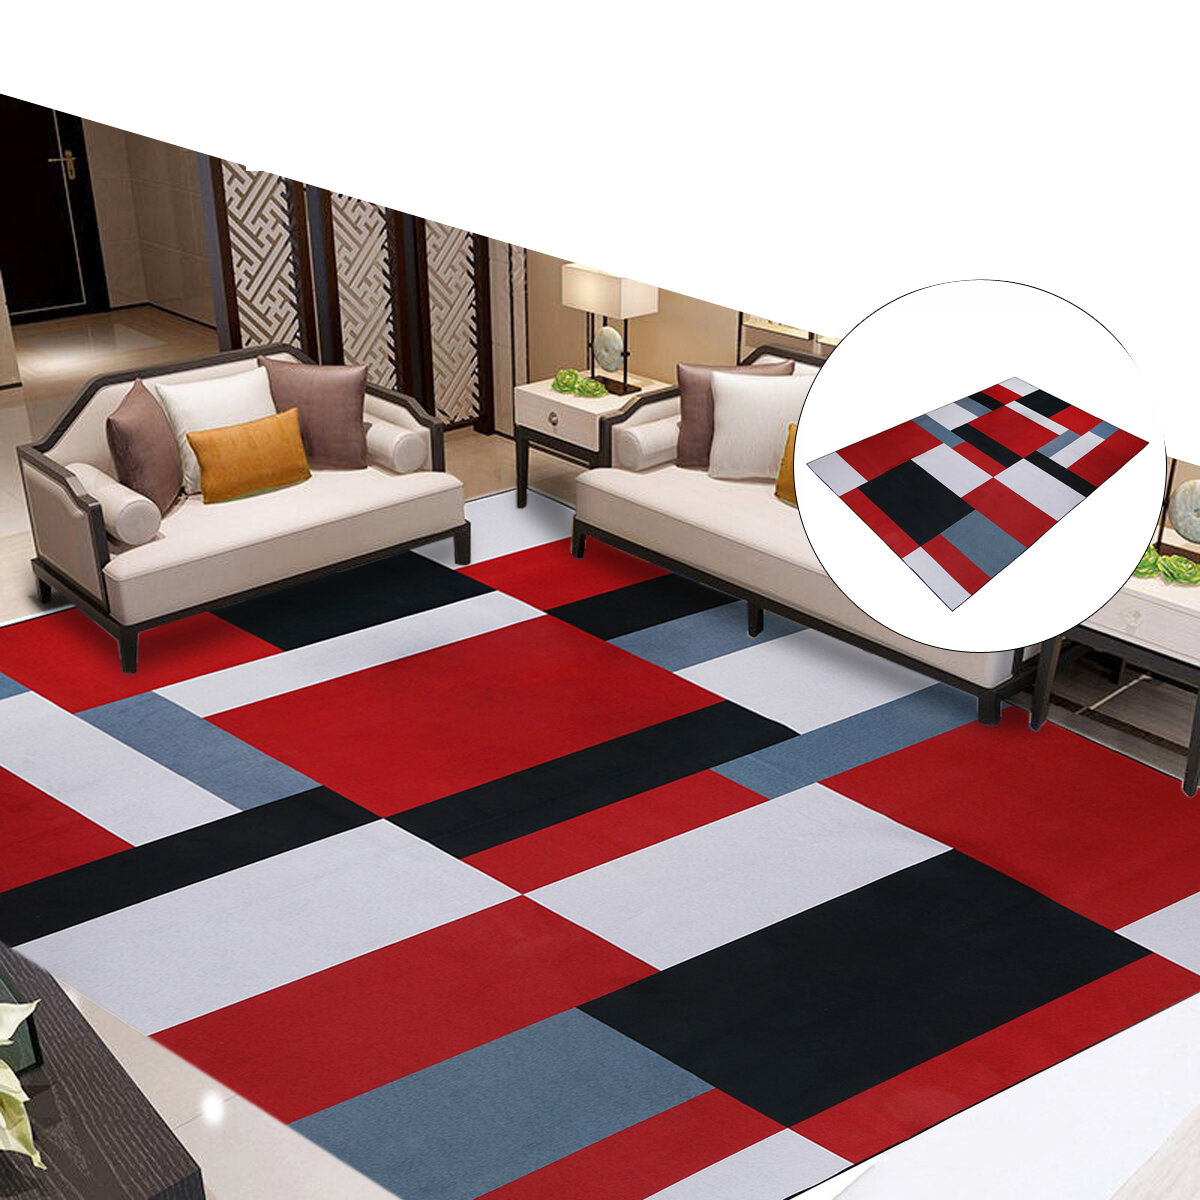 Mixed Colors Area Rugs Modern Carpet Polyester Carpet Rug for Home Living Room Bedroom Decor